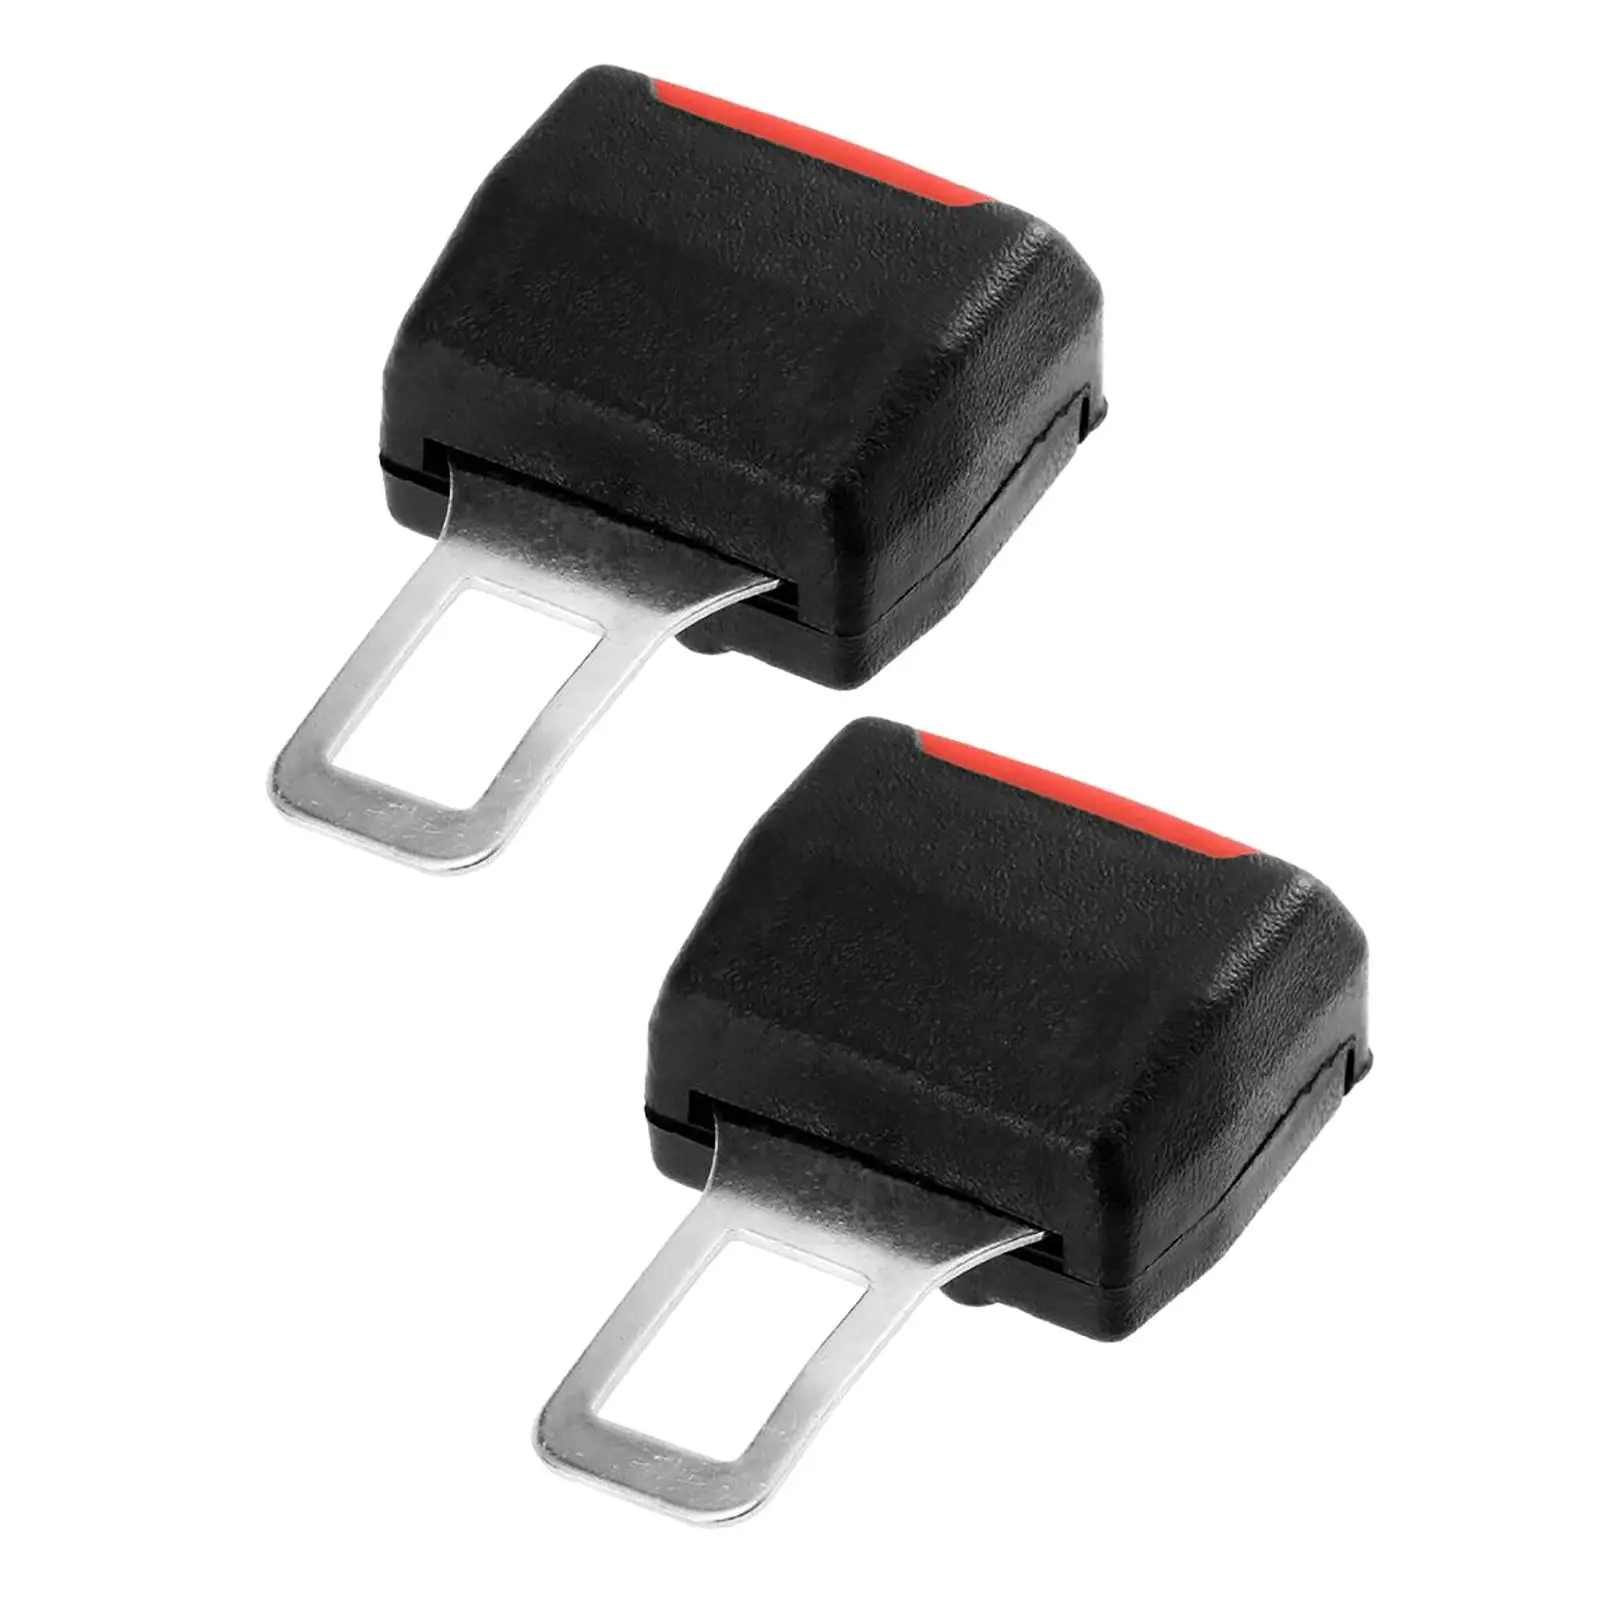 2 Pieces Car Safety Seat Belt Extender Universal for Vehicle Car Adult